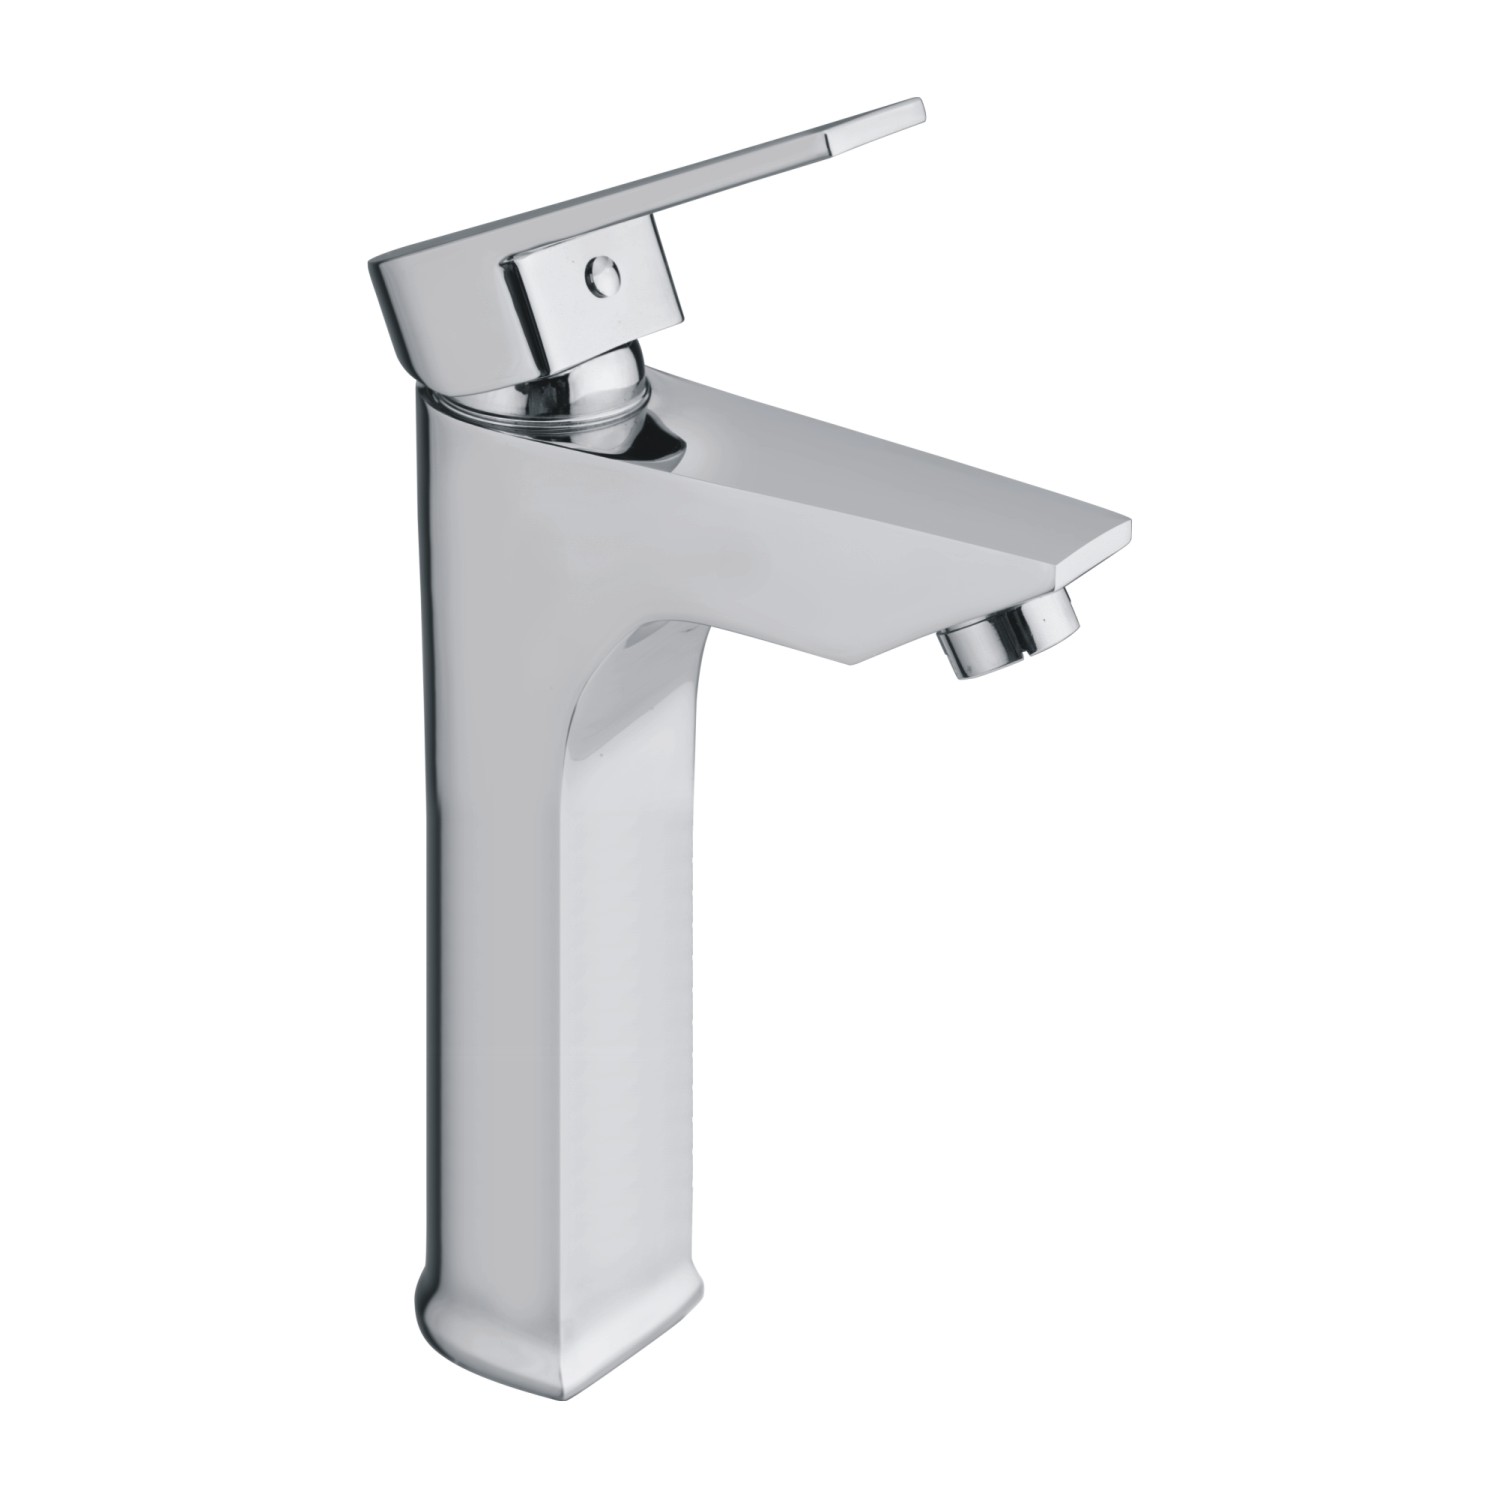 C.P Single Lever Centre Hole Basin Mixer Extended Body